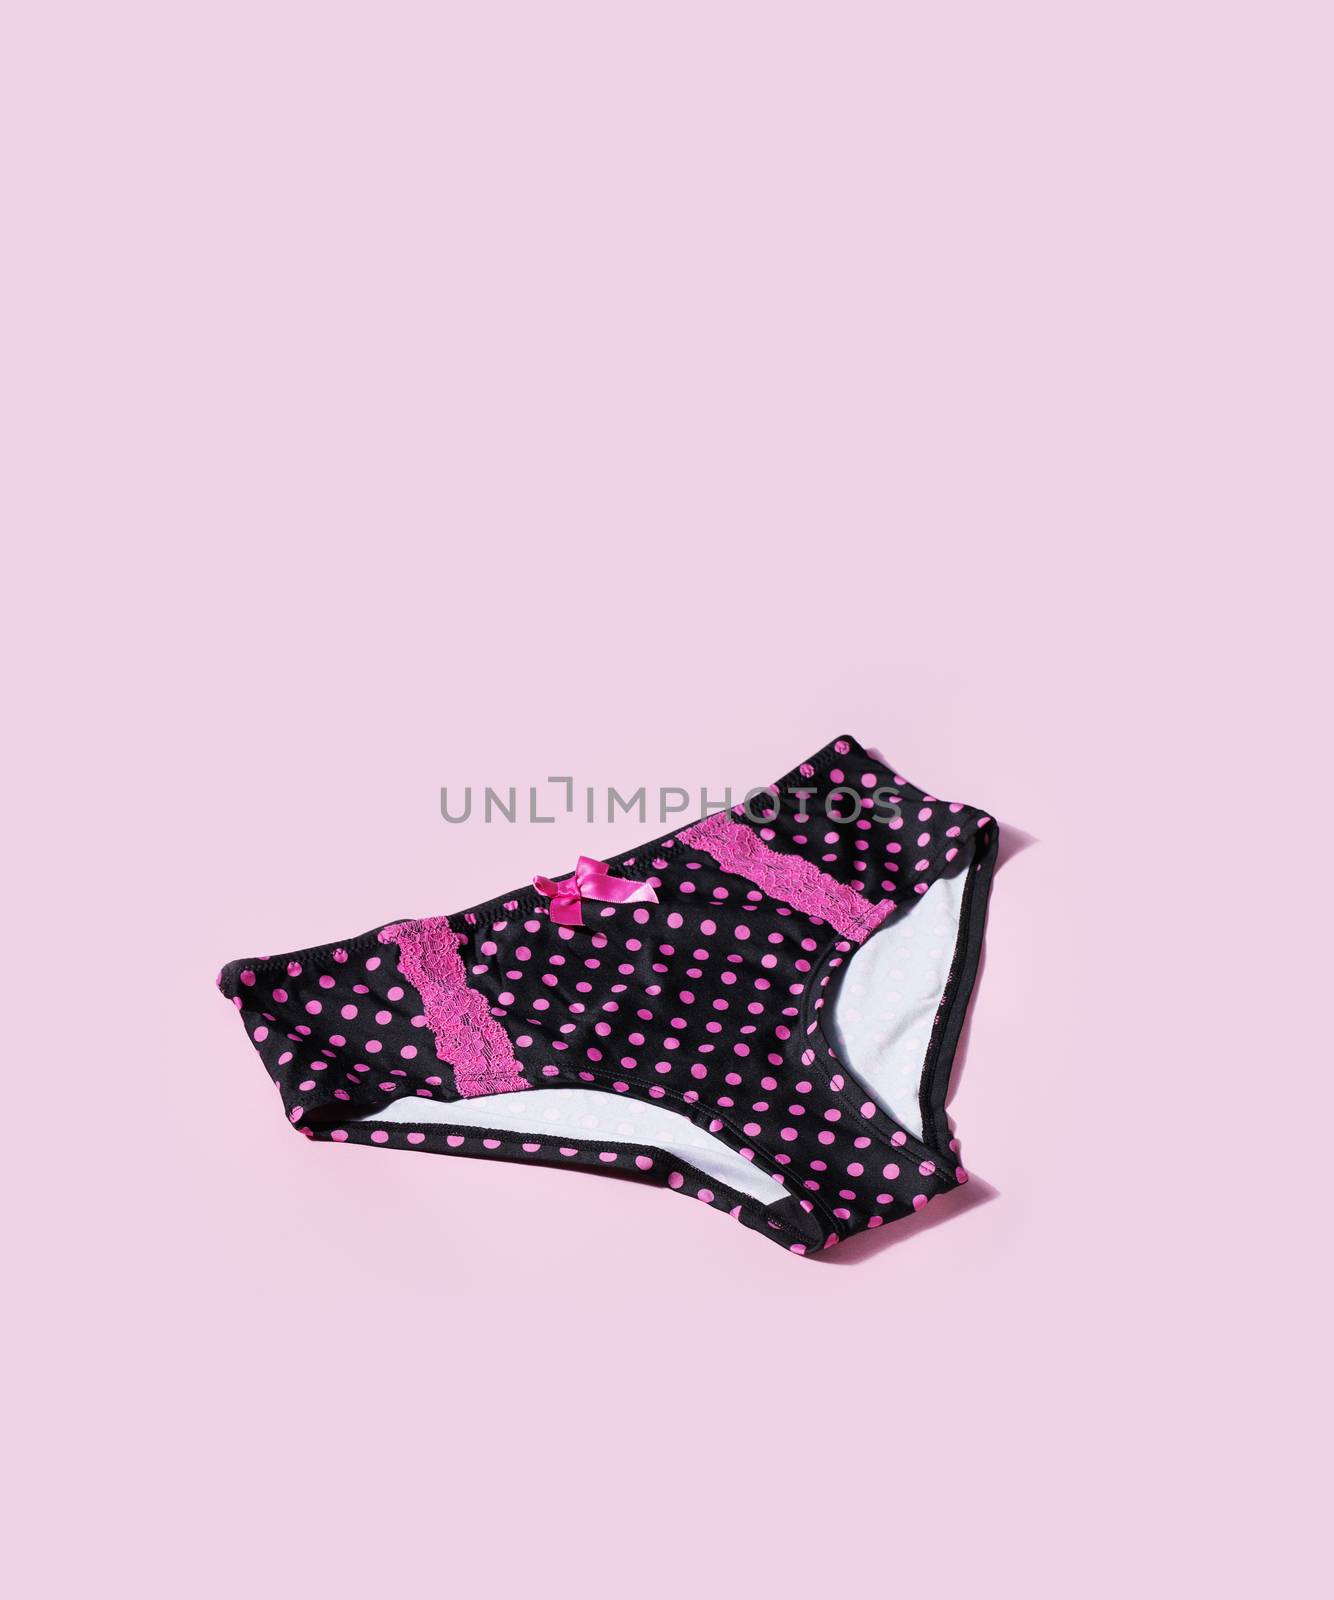 Women's black panties with pink polka dots on pink background with natural shadows.